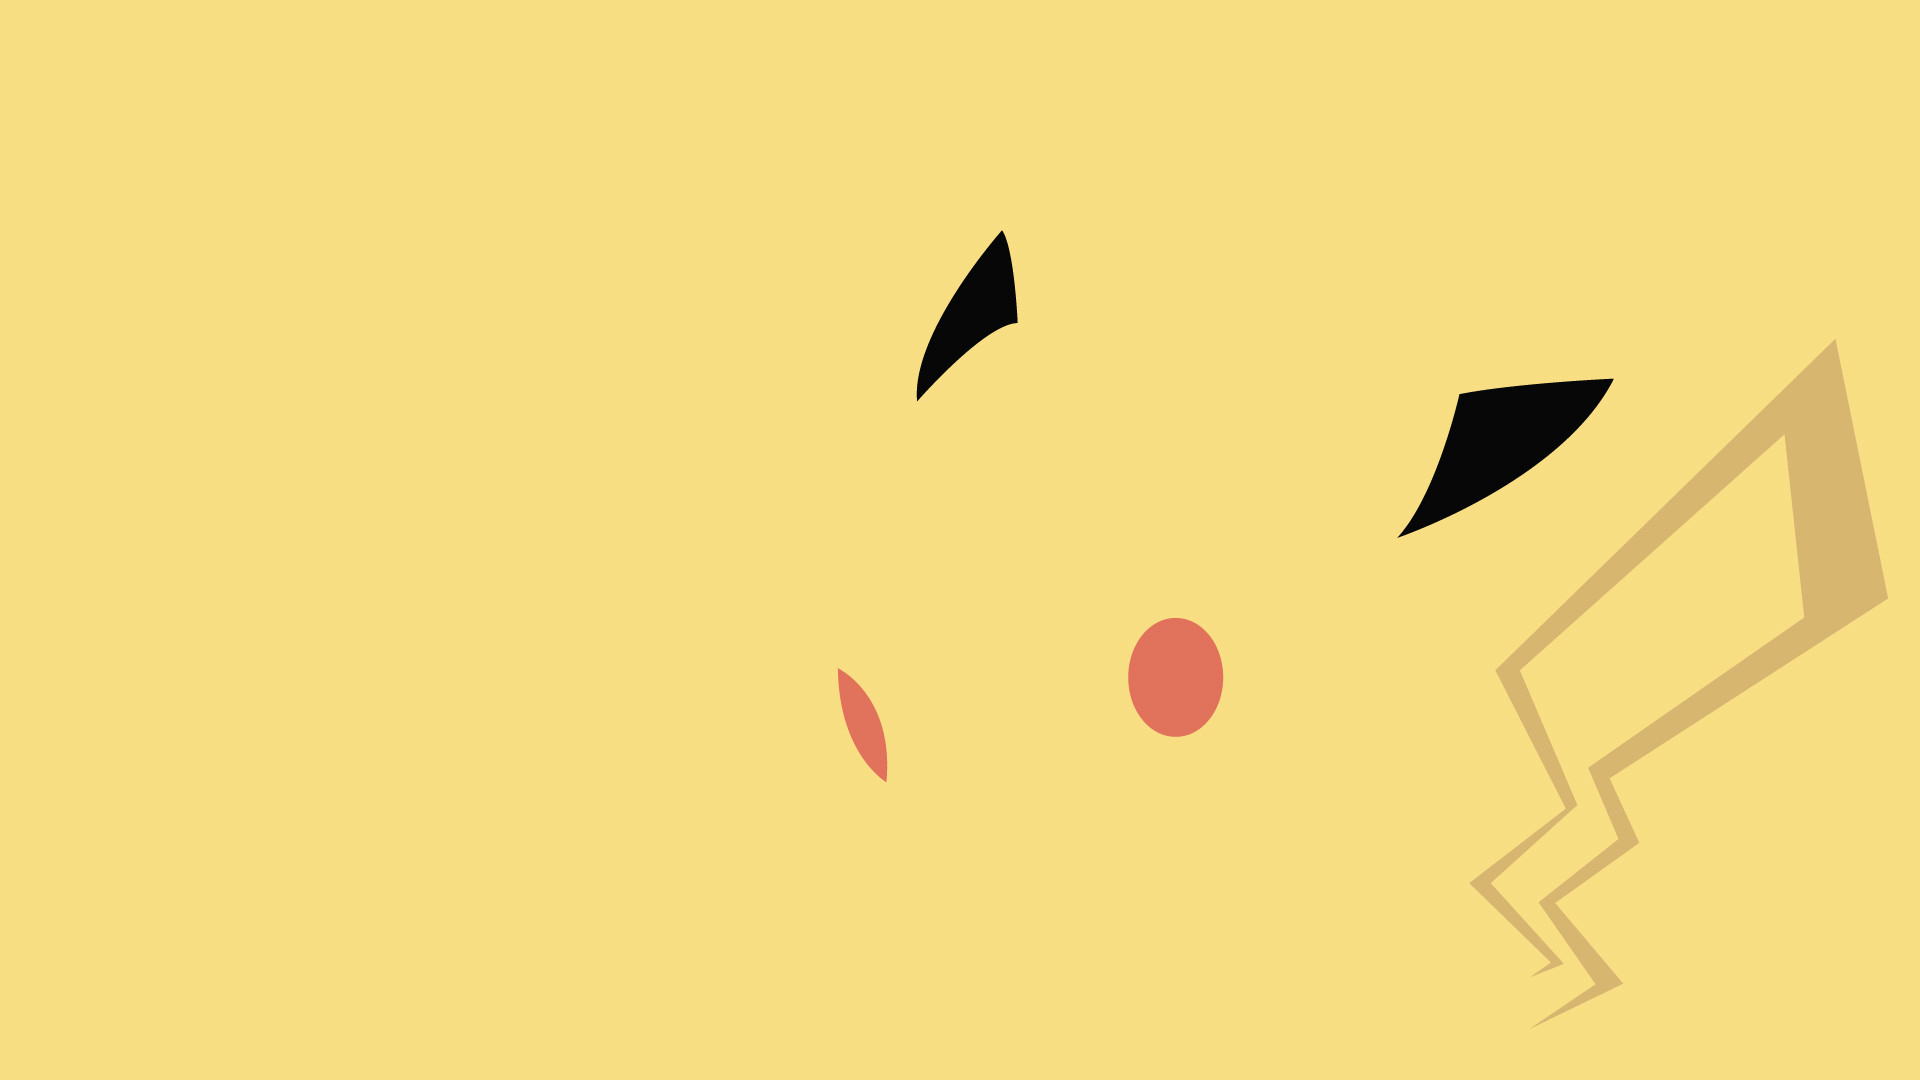 Awesome minimalist Pikachu wallpaper. There is a whole collection of them at the linked site